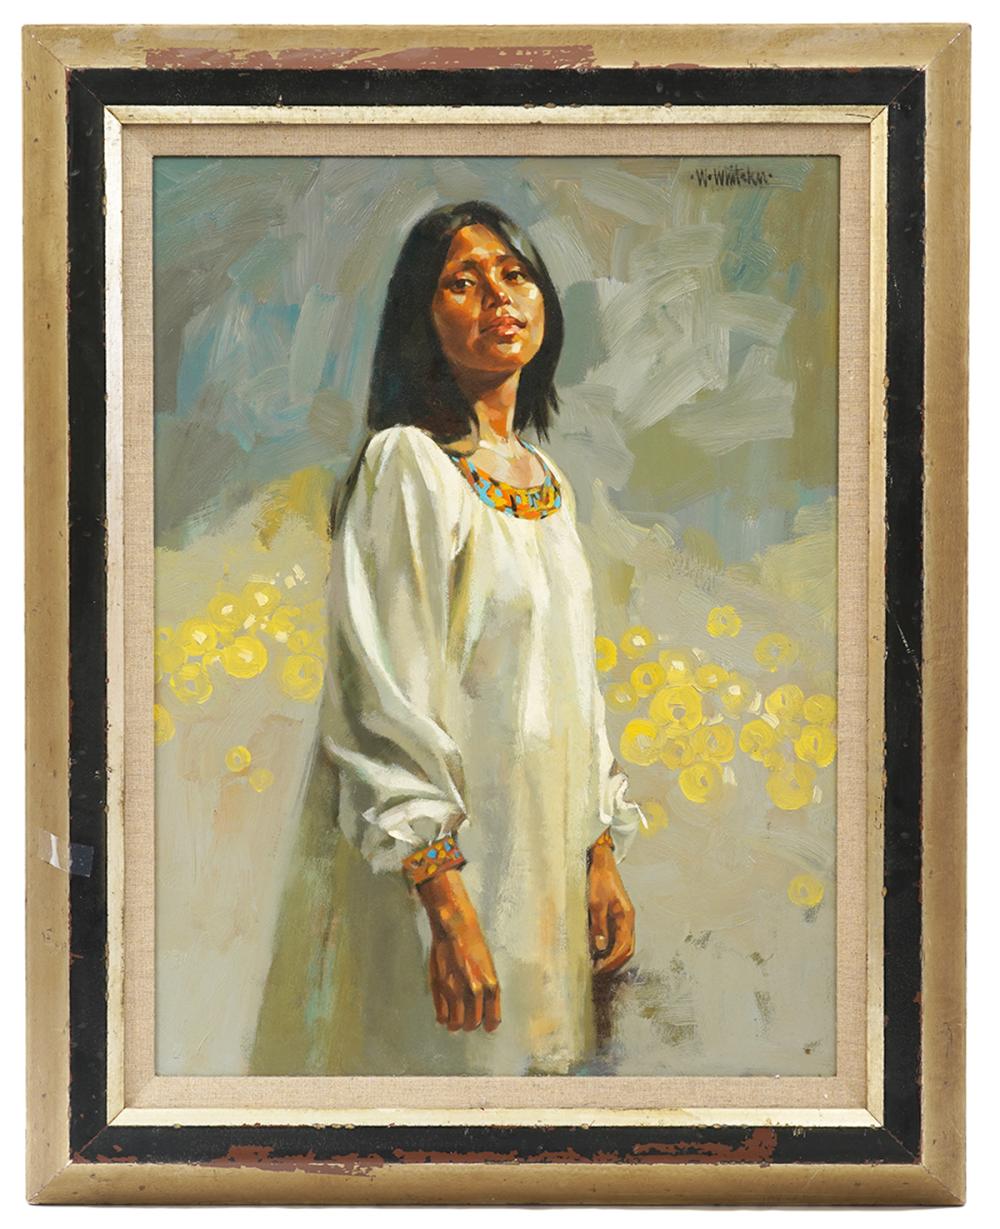 WILLIAM WHITAKER 'INDIAN STUDENT'